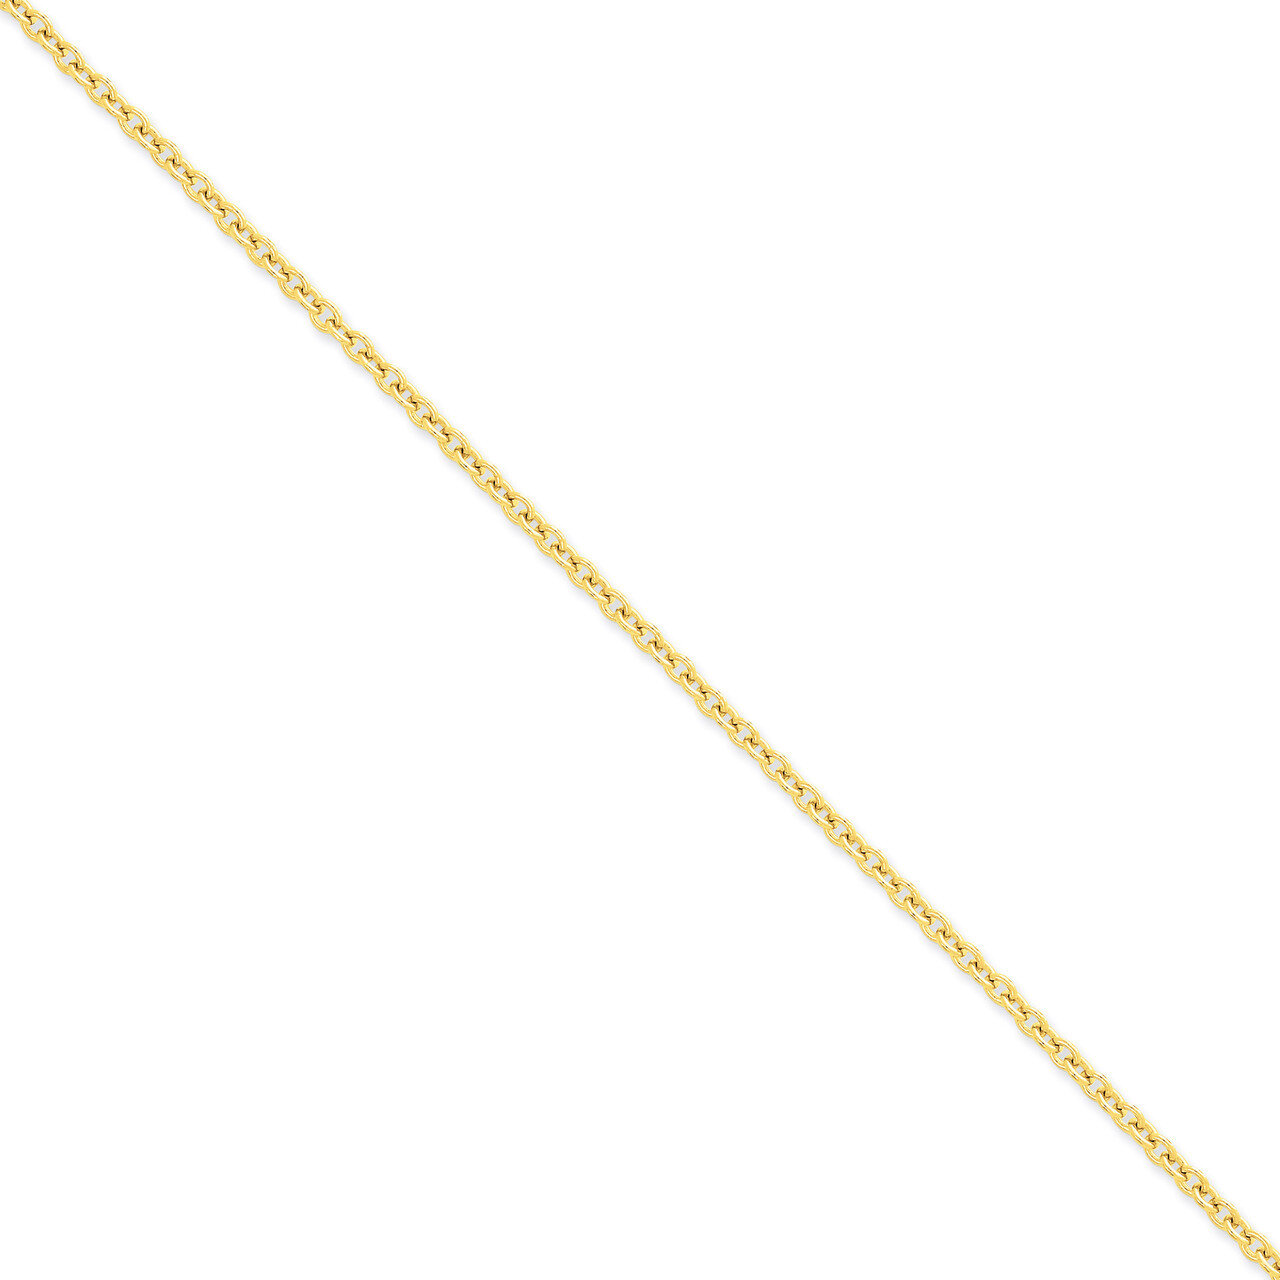 3.2mm Cable Chain 16 Inch 14k Gold PEN218-16